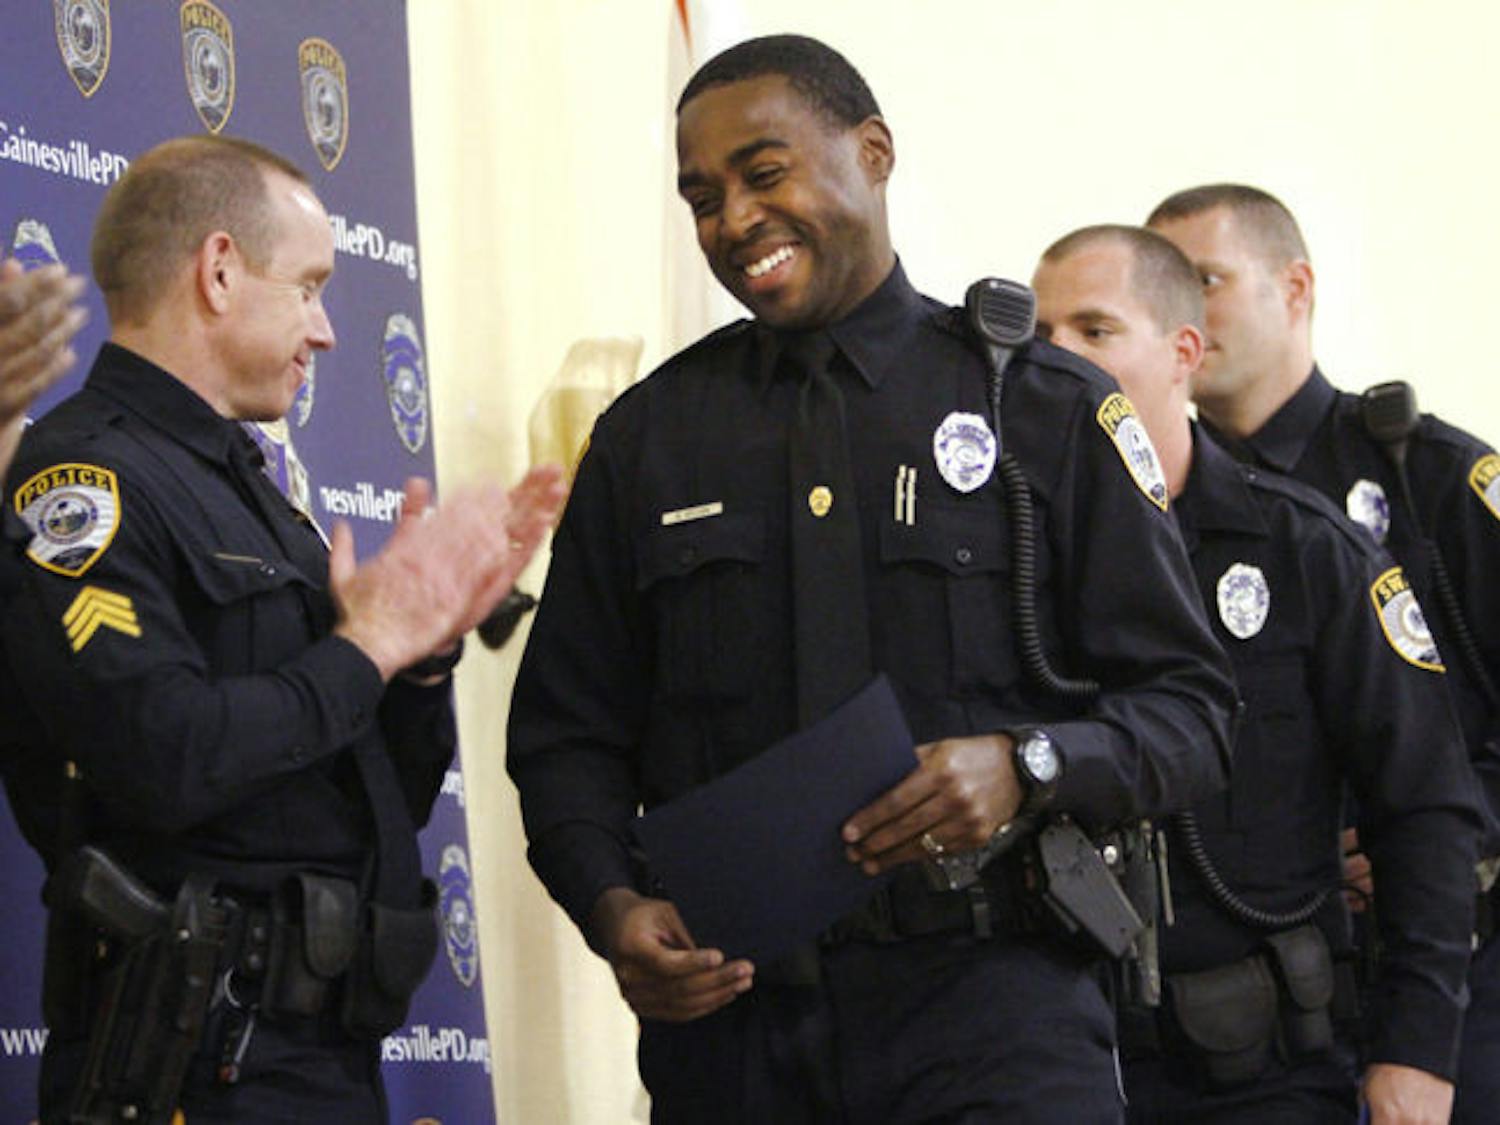 Gainesville Police Officer Warren Brown accepts an Award of Excellence during the Gainesville Police Department Awards Ceremony at Springhill Missionary Baptist Church on Thursday.